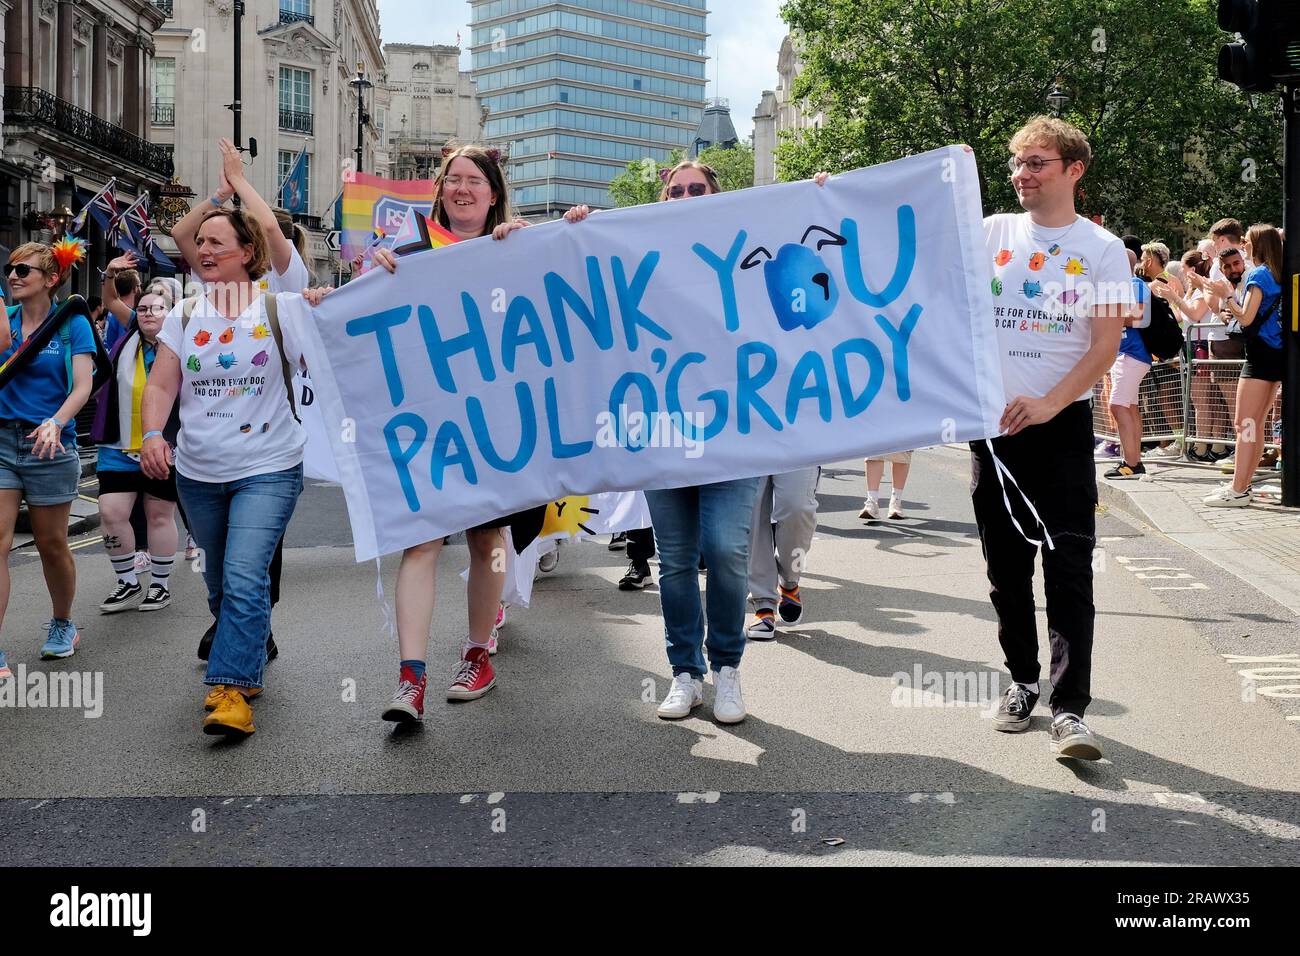 London, UK. Pride in London Parade marchers representing Battersea Cats and Dogs Home thank Paul O'Grady for his long term support. Stock Photo